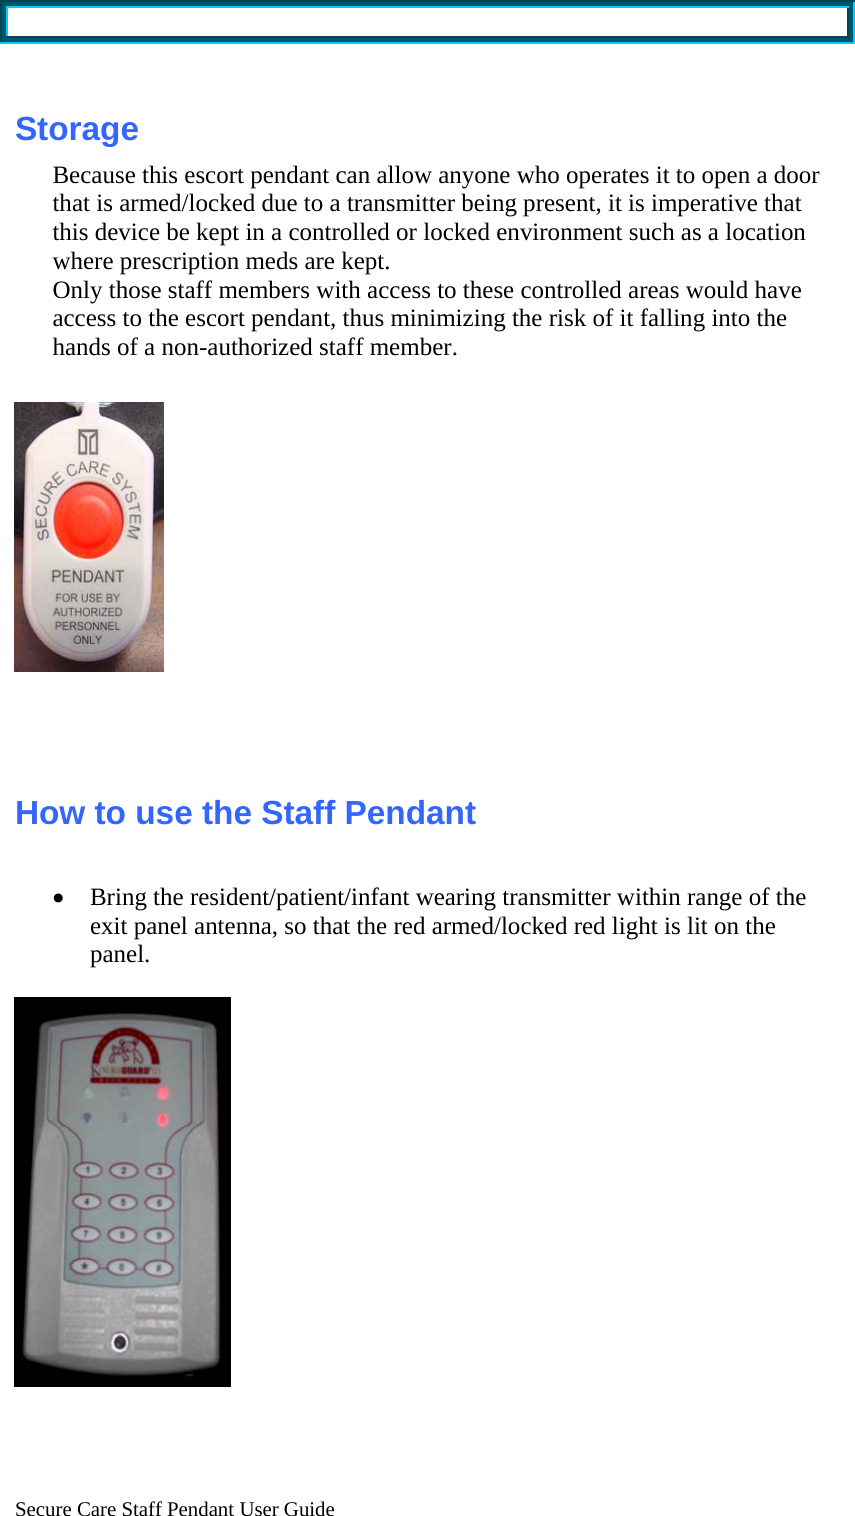  Secure Care Staff Pendant User Guide  Storage Because this escort pendant can allow anyone who operates it to open a door that is armed/locked due to a transmitter being present, it is imperative that this device be kept in a controlled or locked environment such as a location where prescription meds are kept. Only those staff members with access to these controlled areas would have access to the escort pendant, thus minimizing the risk of it falling into the hands of a non-authorized staff member.      How to use the Staff Pendant  • Bring the resident/patient/infant wearing transmitter within range of the exit panel antenna, so that the red armed/locked red light is lit on the panel.     